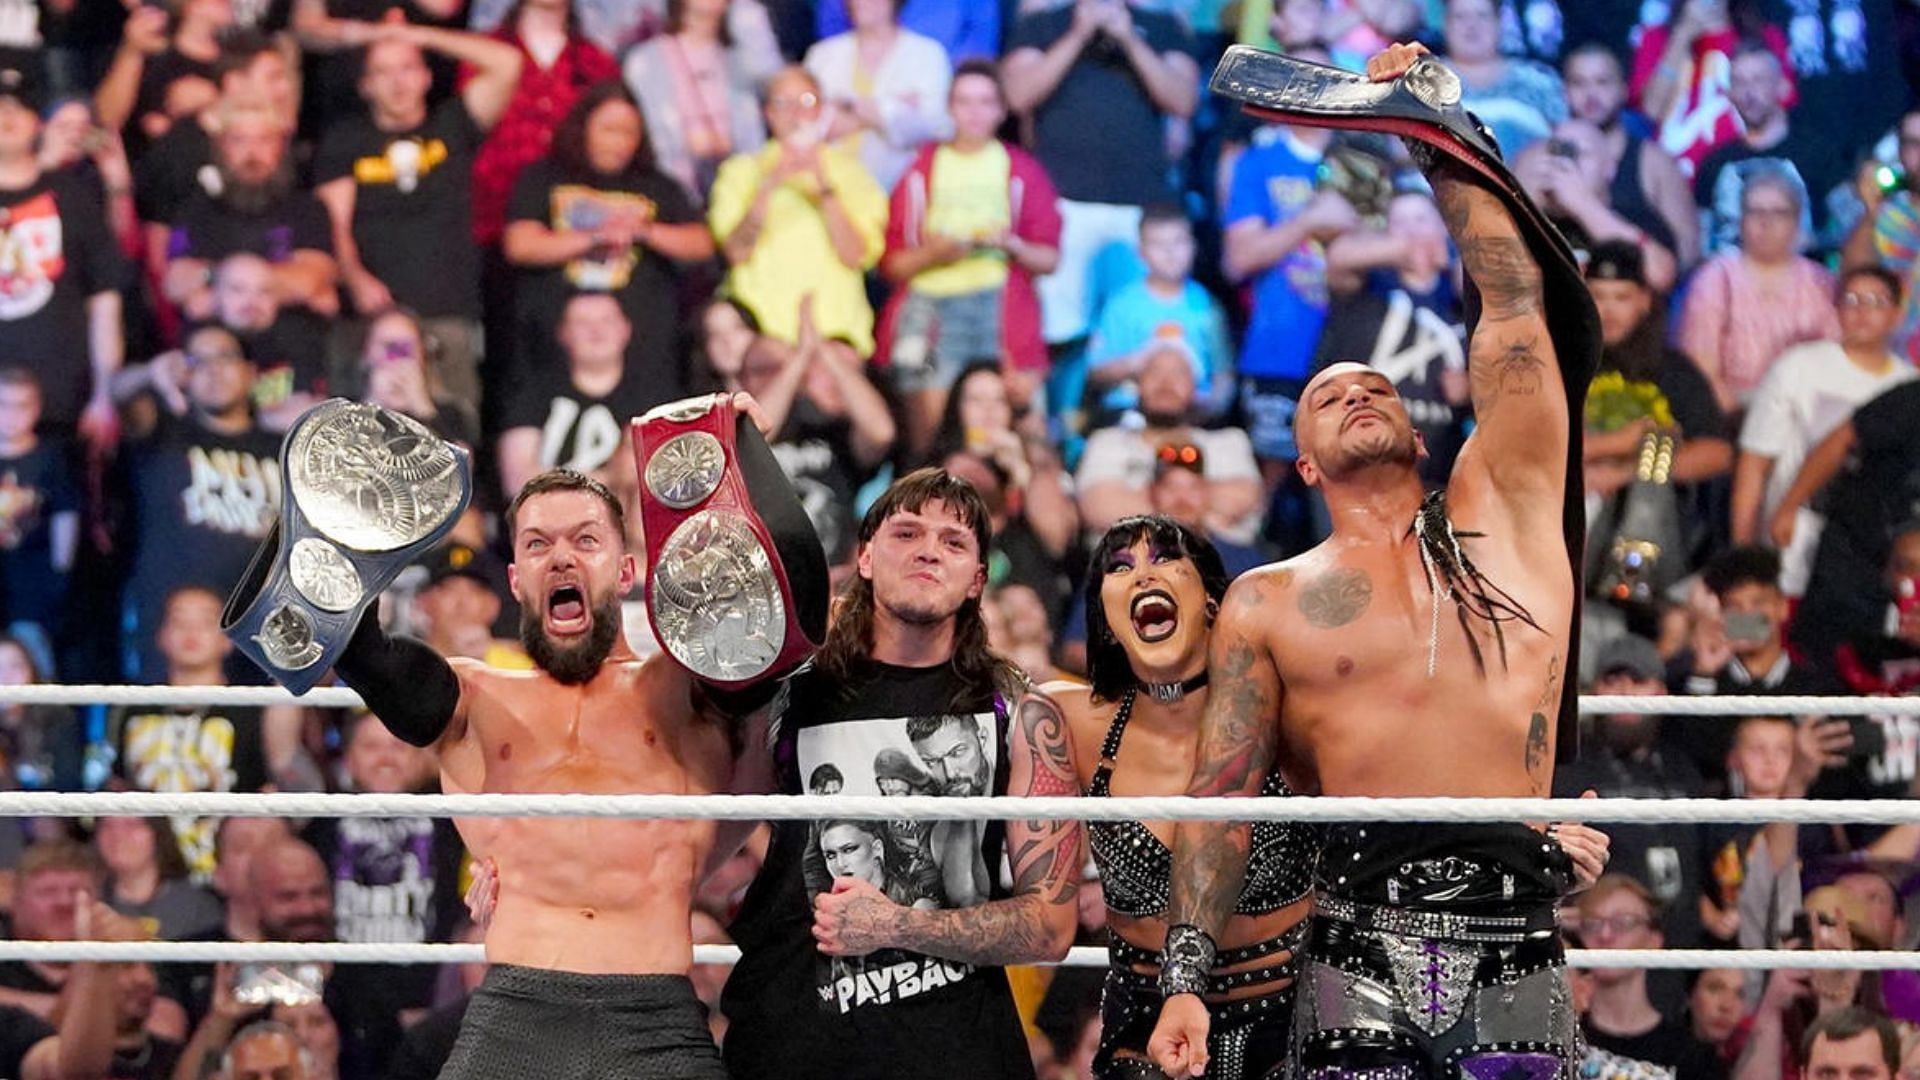 The Judgment Day are the current Undisputed WWE Tag Team Champions!